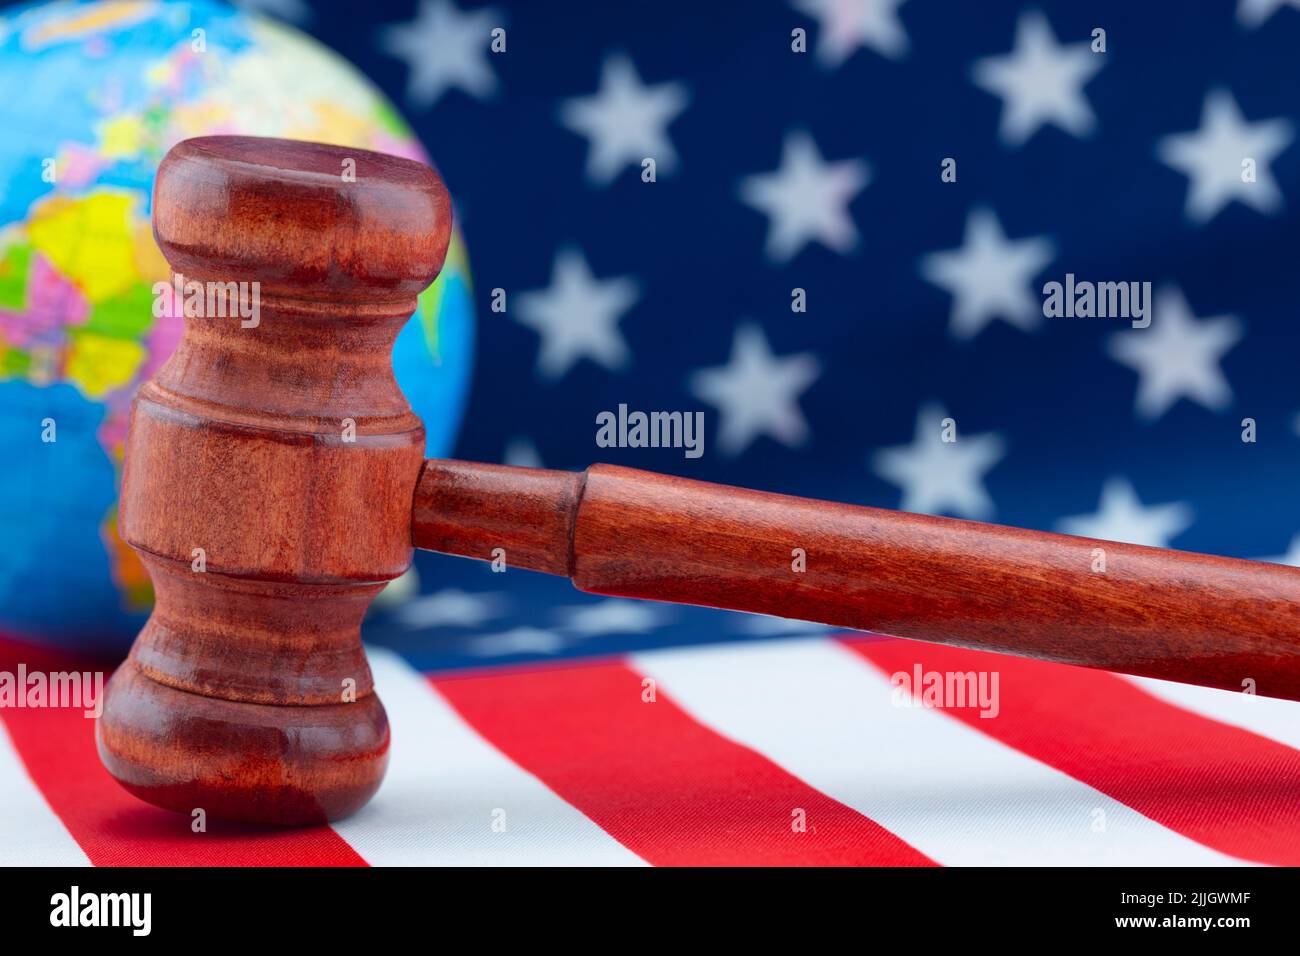 Concept of American justice and laws working in global environment reflected in symbols of gavel, flag, and globe Stock Photo